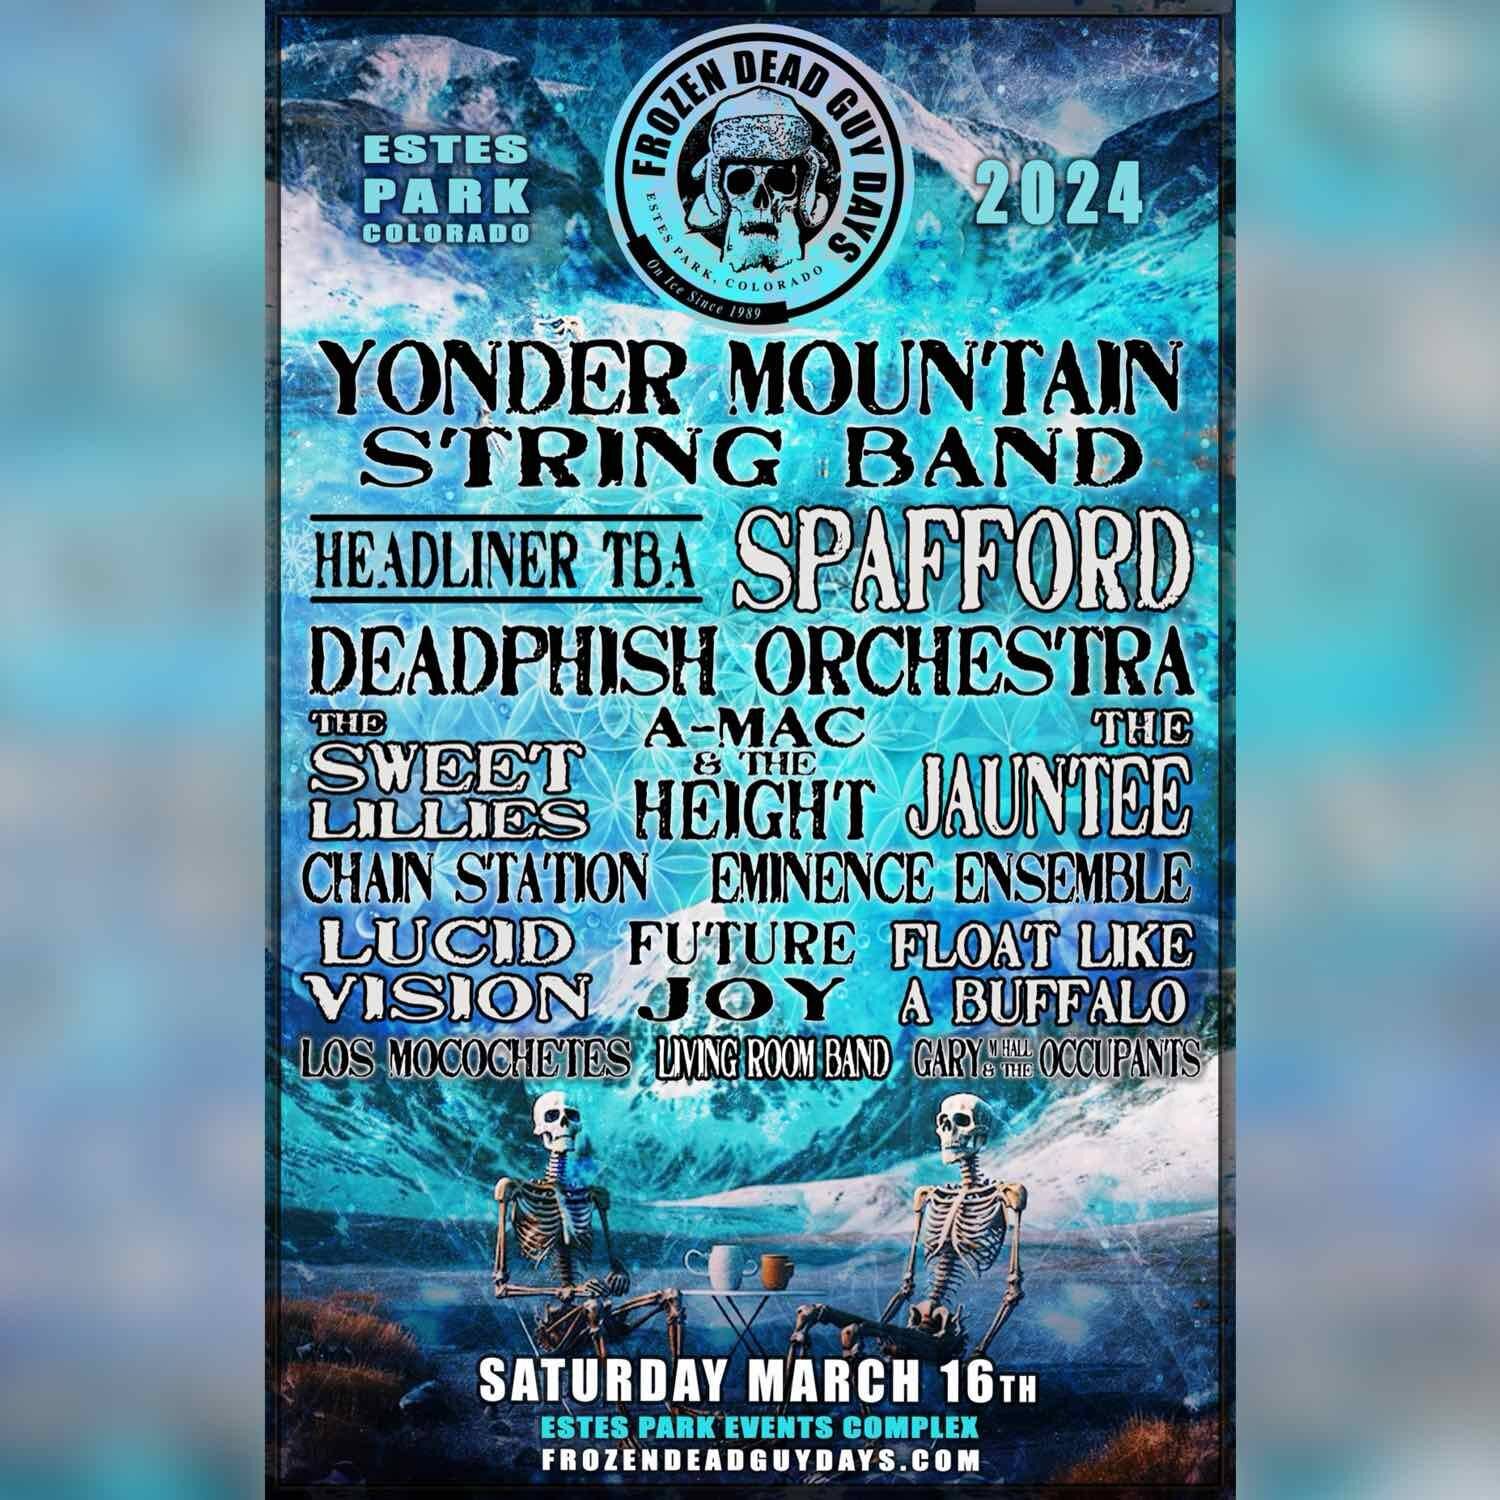 ❄️🦬🪩 FESTIVAL ANNOUNCEMENT 🪩🦬❄️

Here we go! First festival announcement of 2024! We're thrilled to be included on this year's lineup for @frozendeadguydays and can't wait to warm it up with y'all in Estes Park on March 16, along with @yondermoun